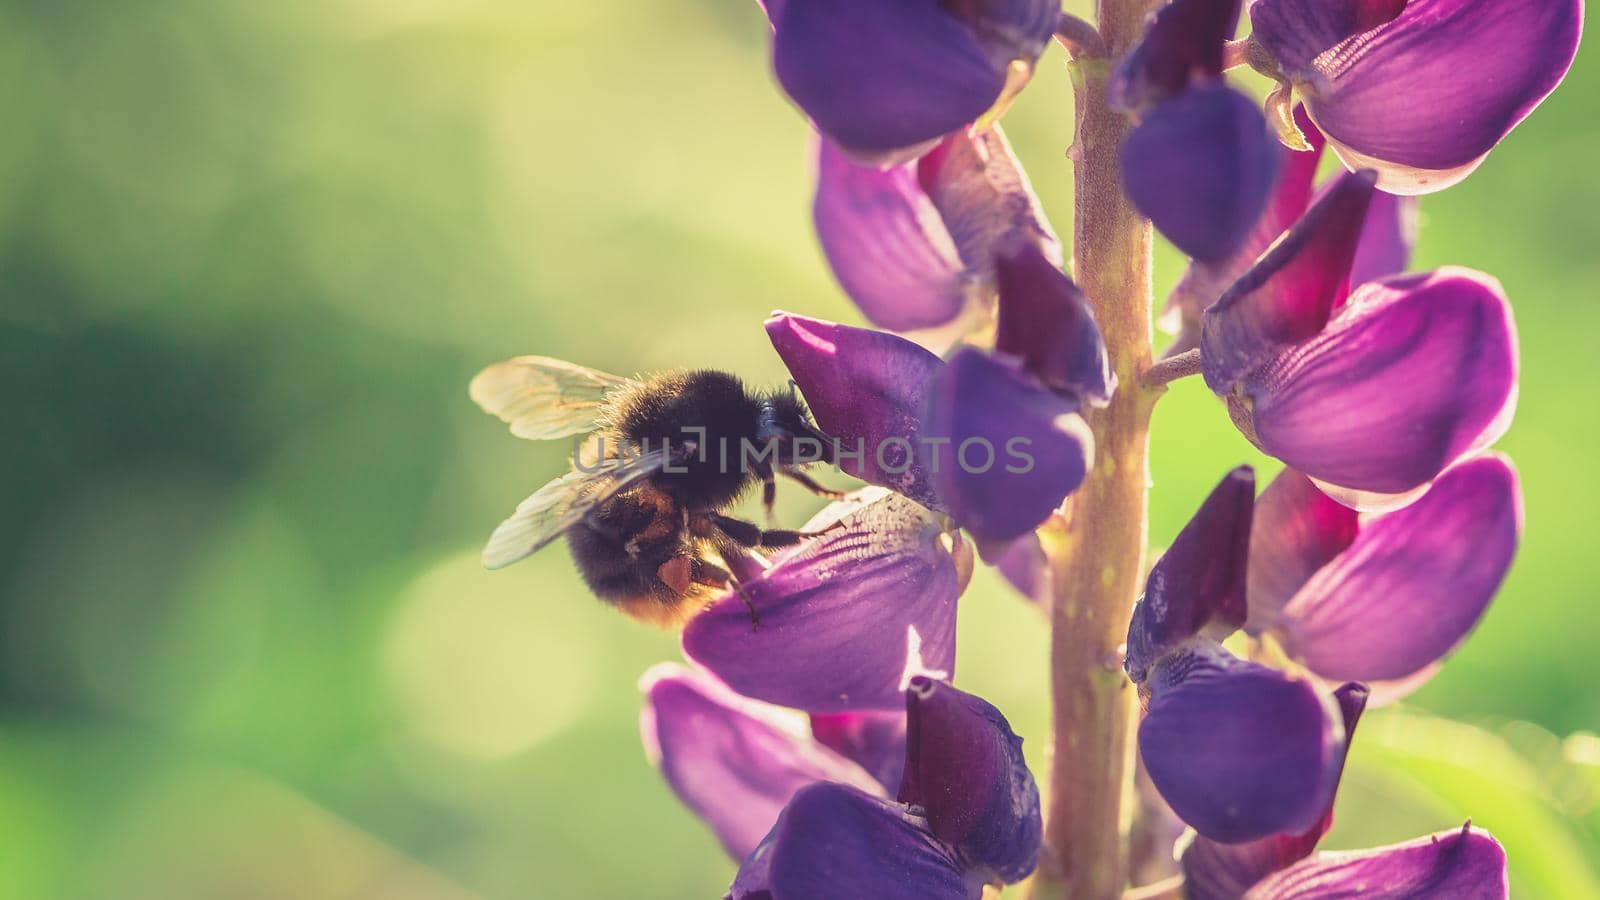 Bumble Bee pollinating and collecting nectar from a Lupin flower in the garden at the Sunset. Shallow debth of field